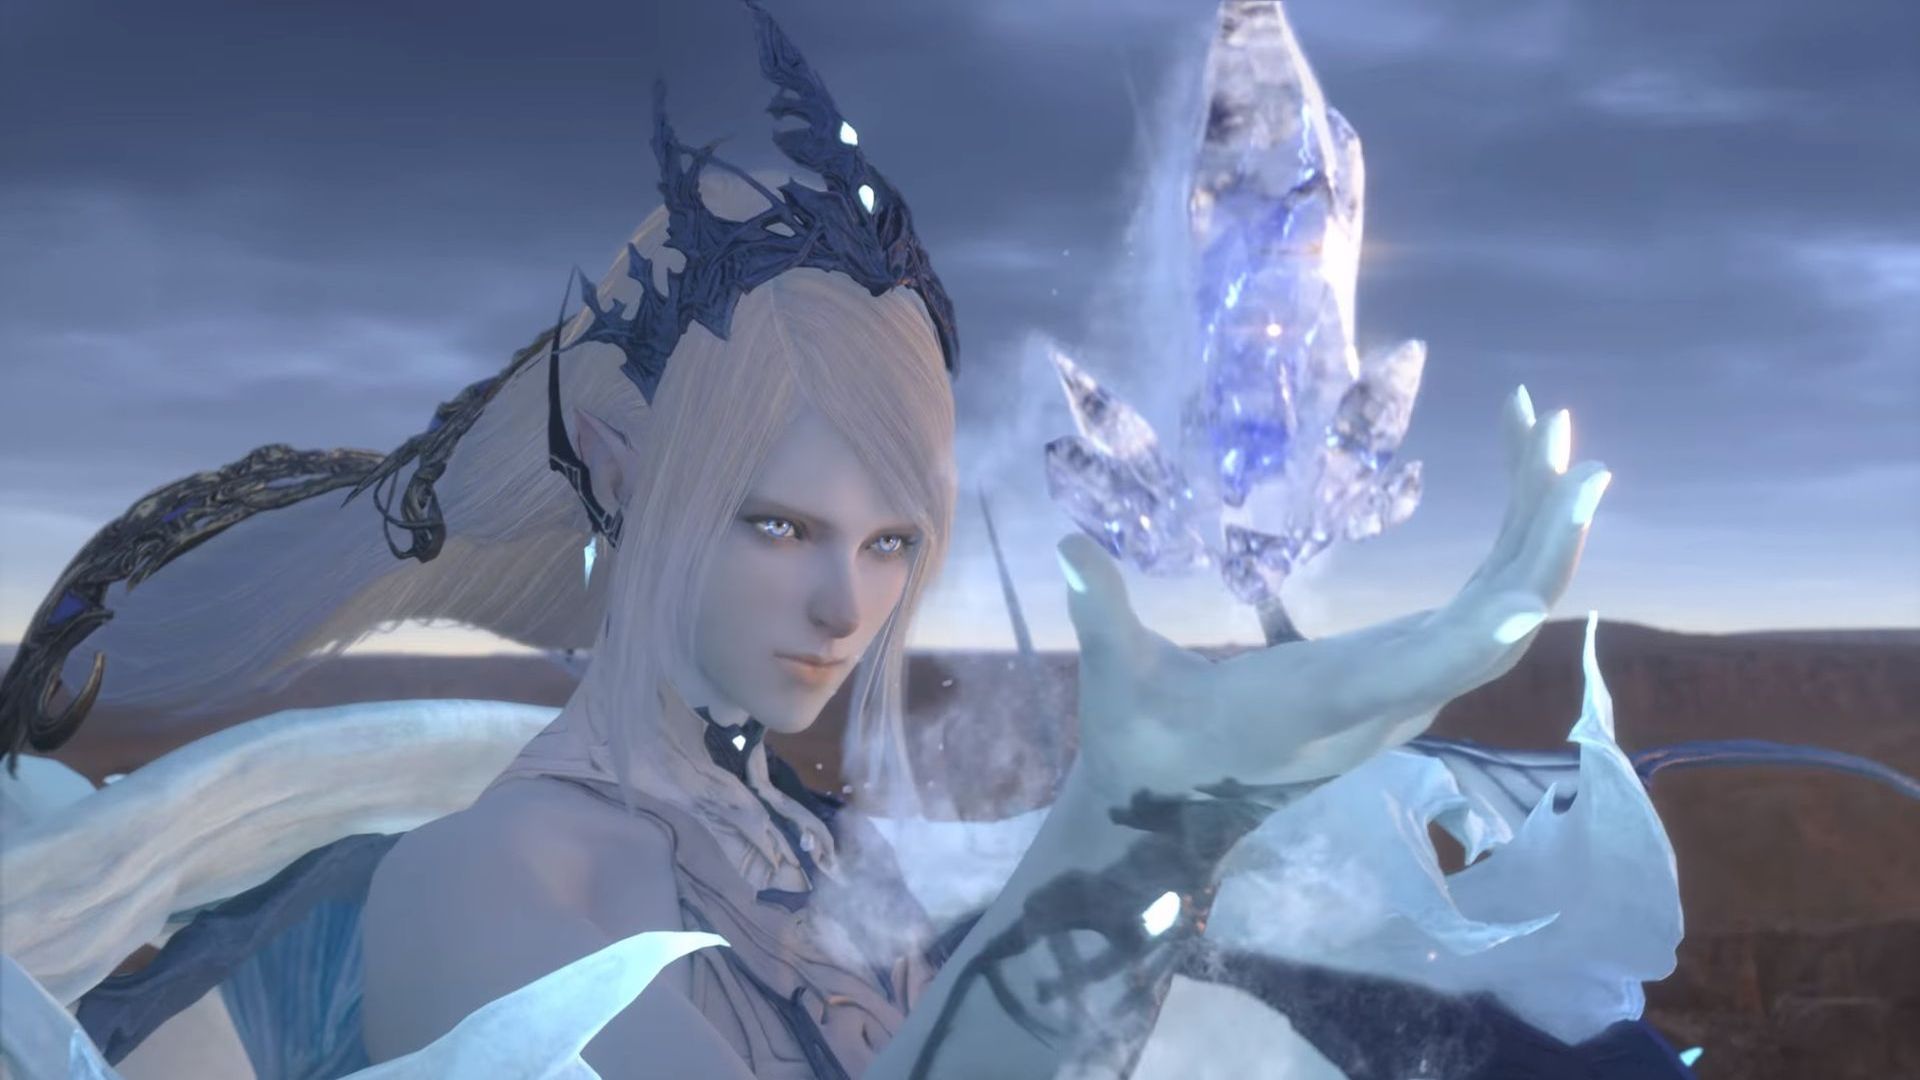 Final Fantasy XVI: Release date, gameplay, story and leaks